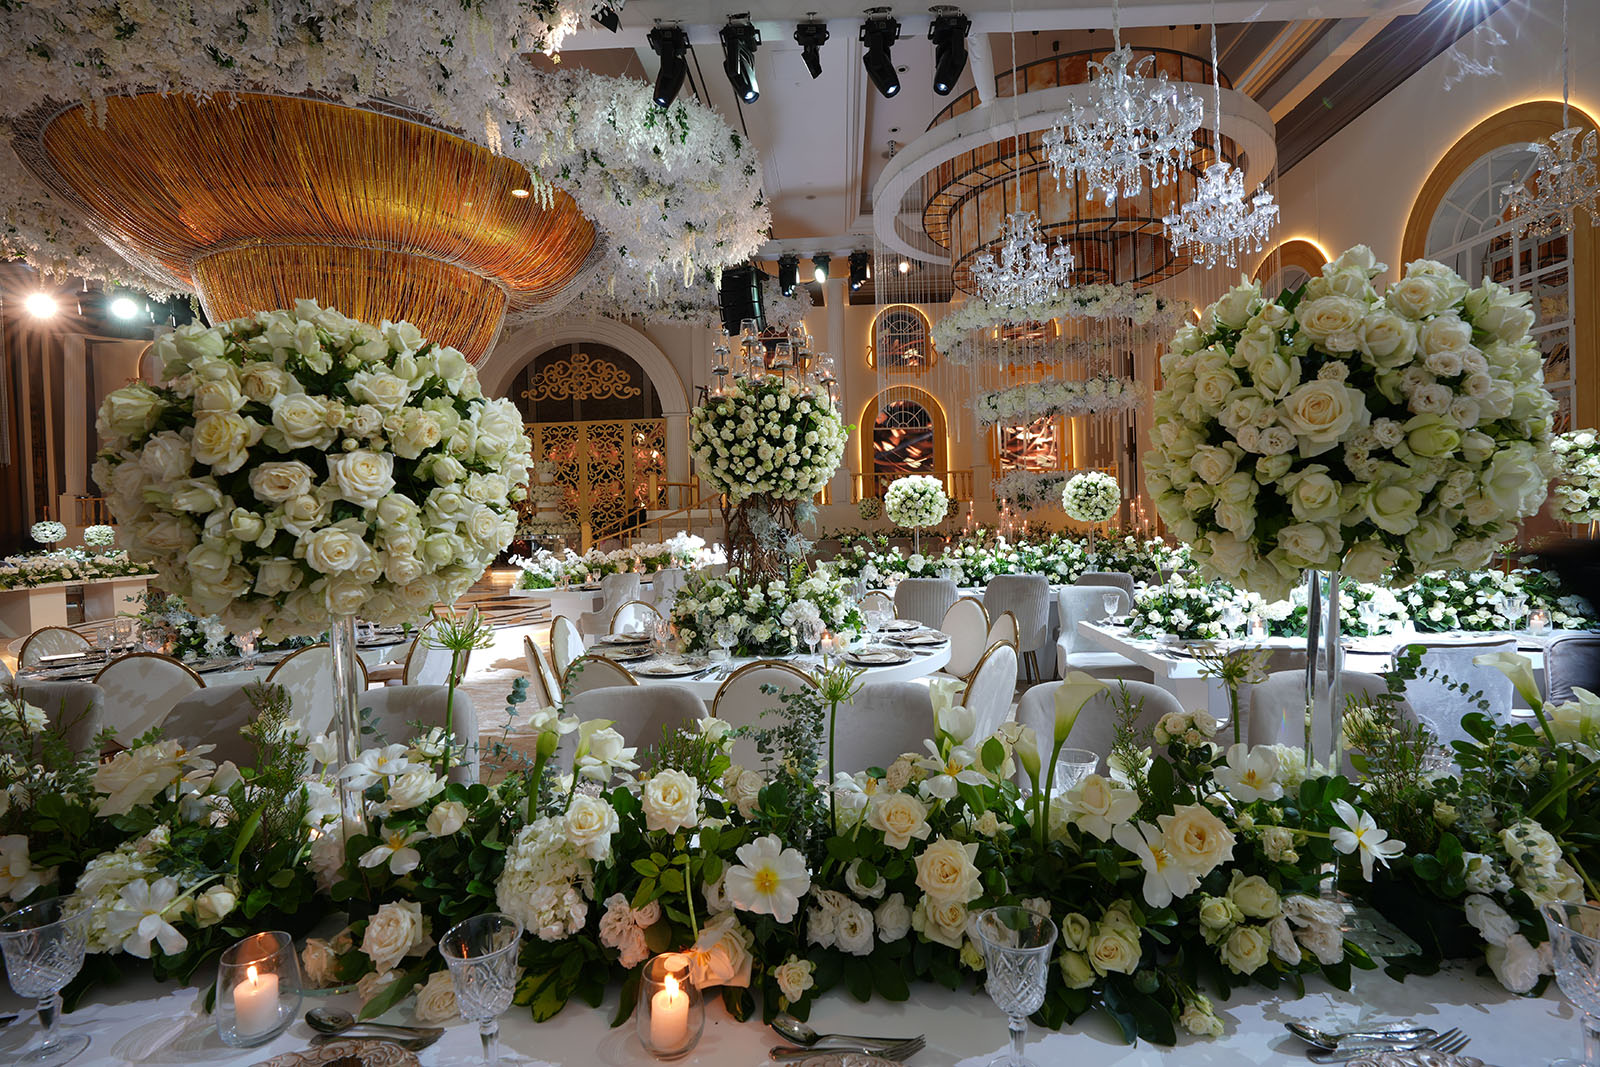 A beautiful wedding table adorned with bouquets of white roses